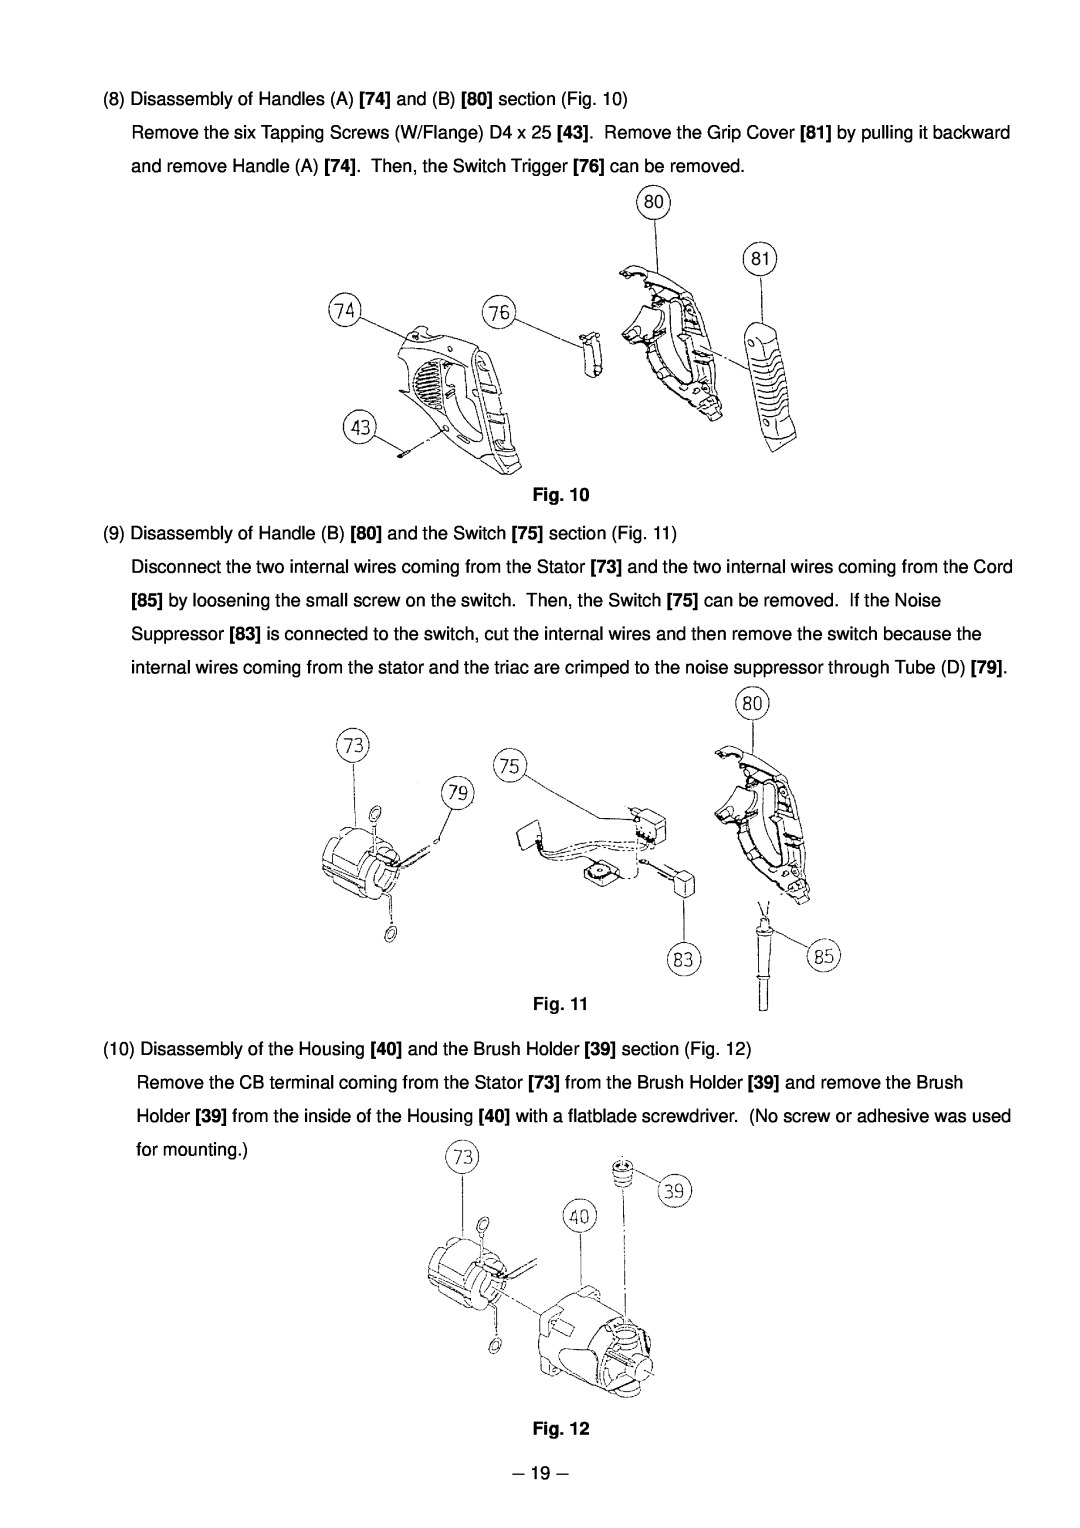 Hitachi CR 13VA service manual 8Disassembly of Handles A 74 and B 80 section Fig 